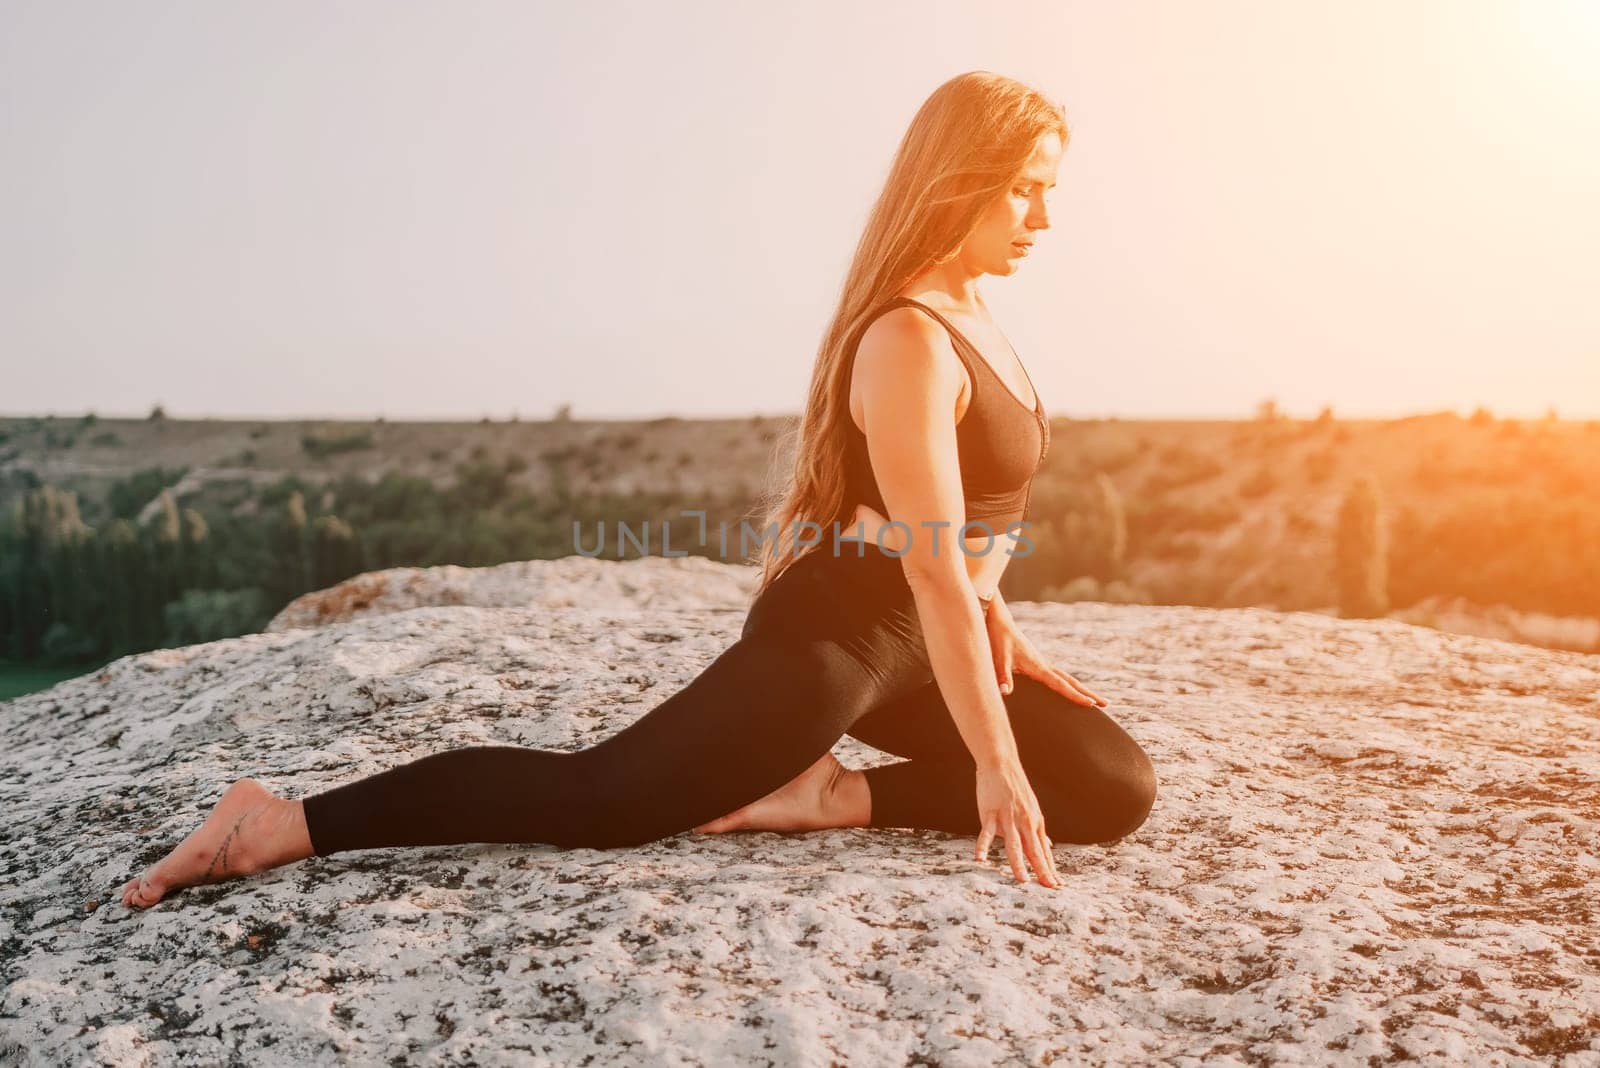 Well looking middle aged woman with long hair, fitness instructor in leggings and tops doing stretching and pilates on the rock near forest. Female fitness yoga routine concept. Healthy lifestyle.